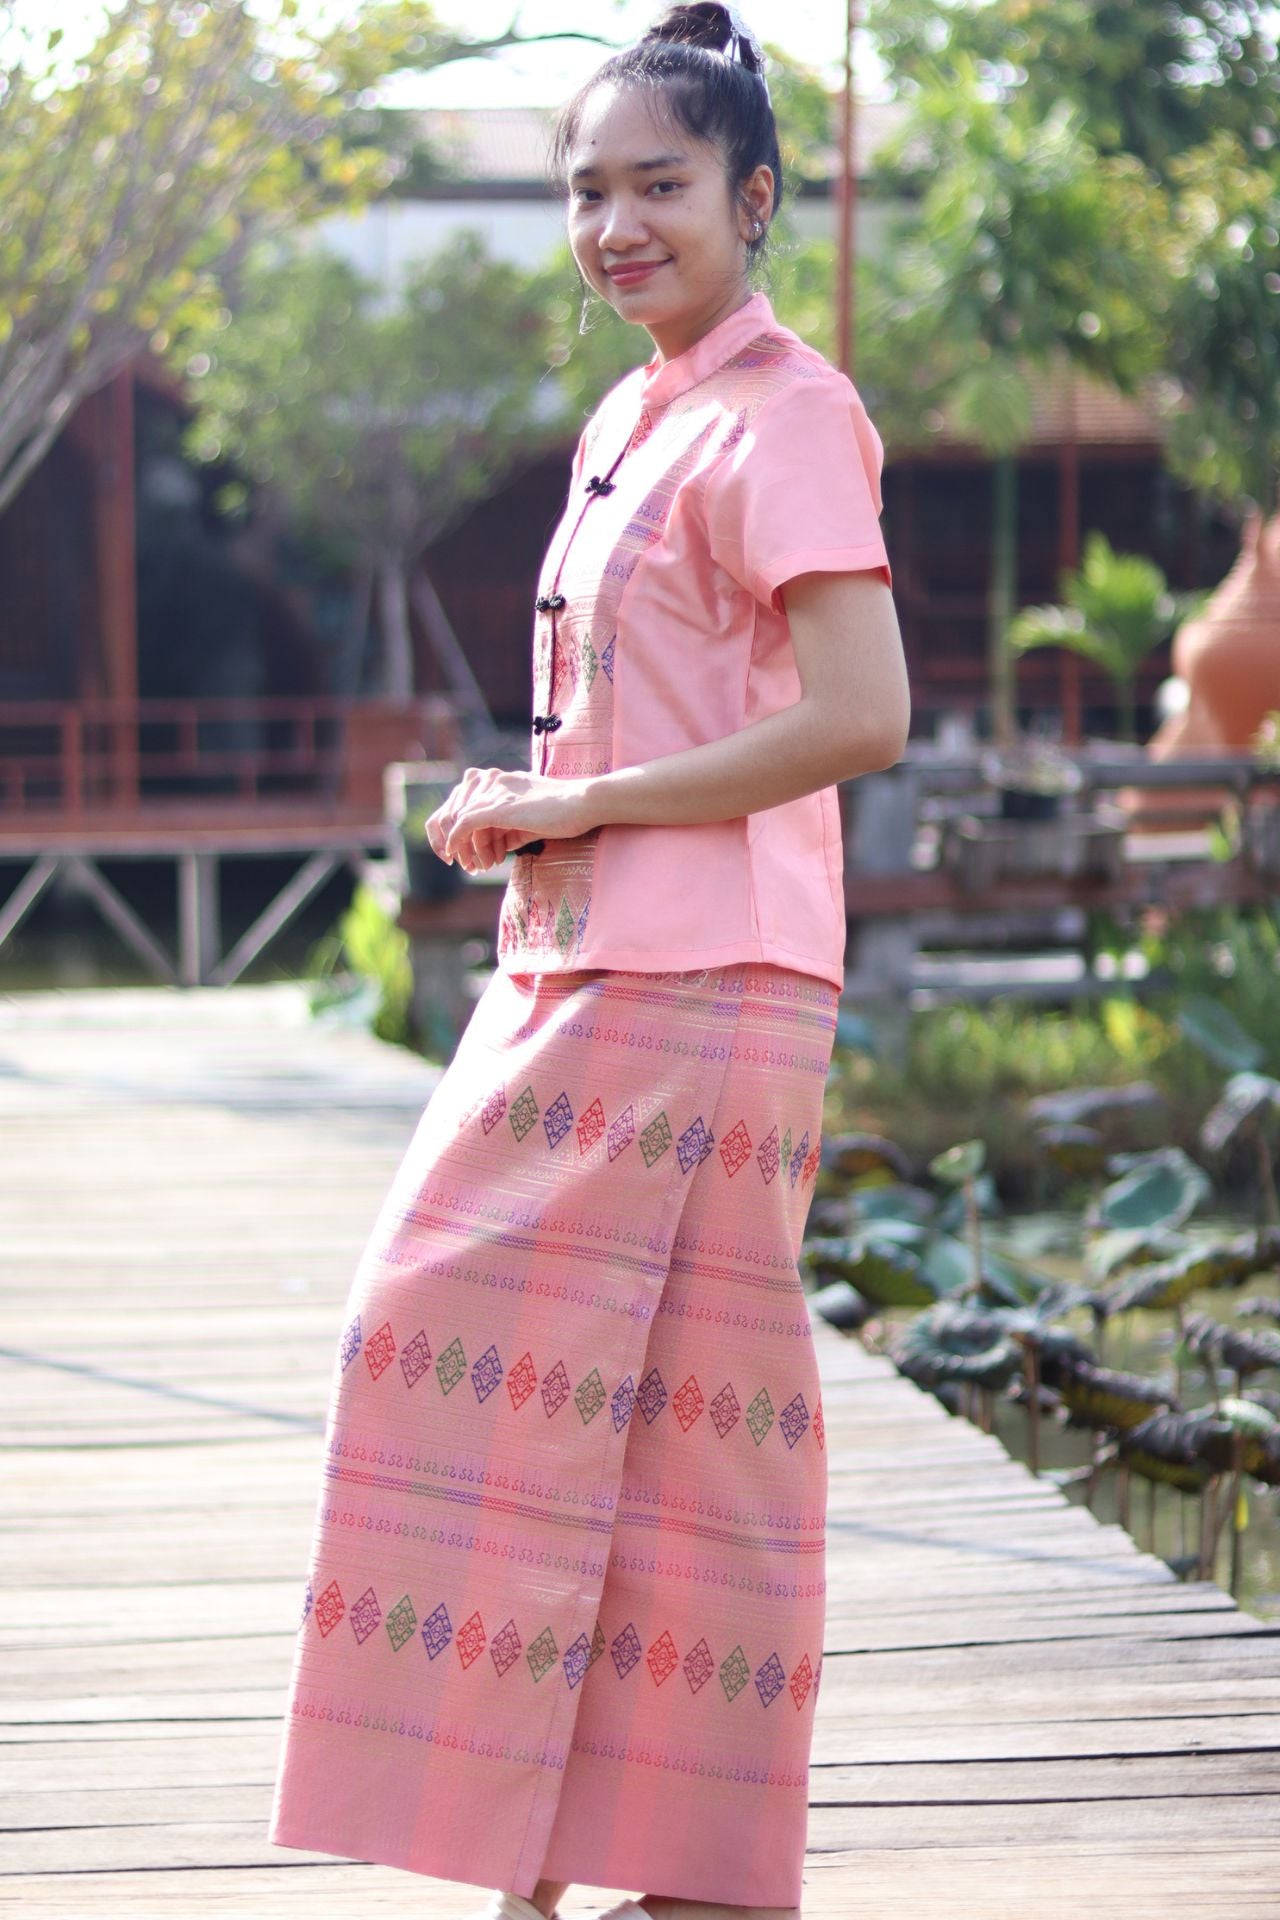 RaanPahMuang Luxurious Traditional Thai Clothing Silk Dress Chinese Front Cut Outfit